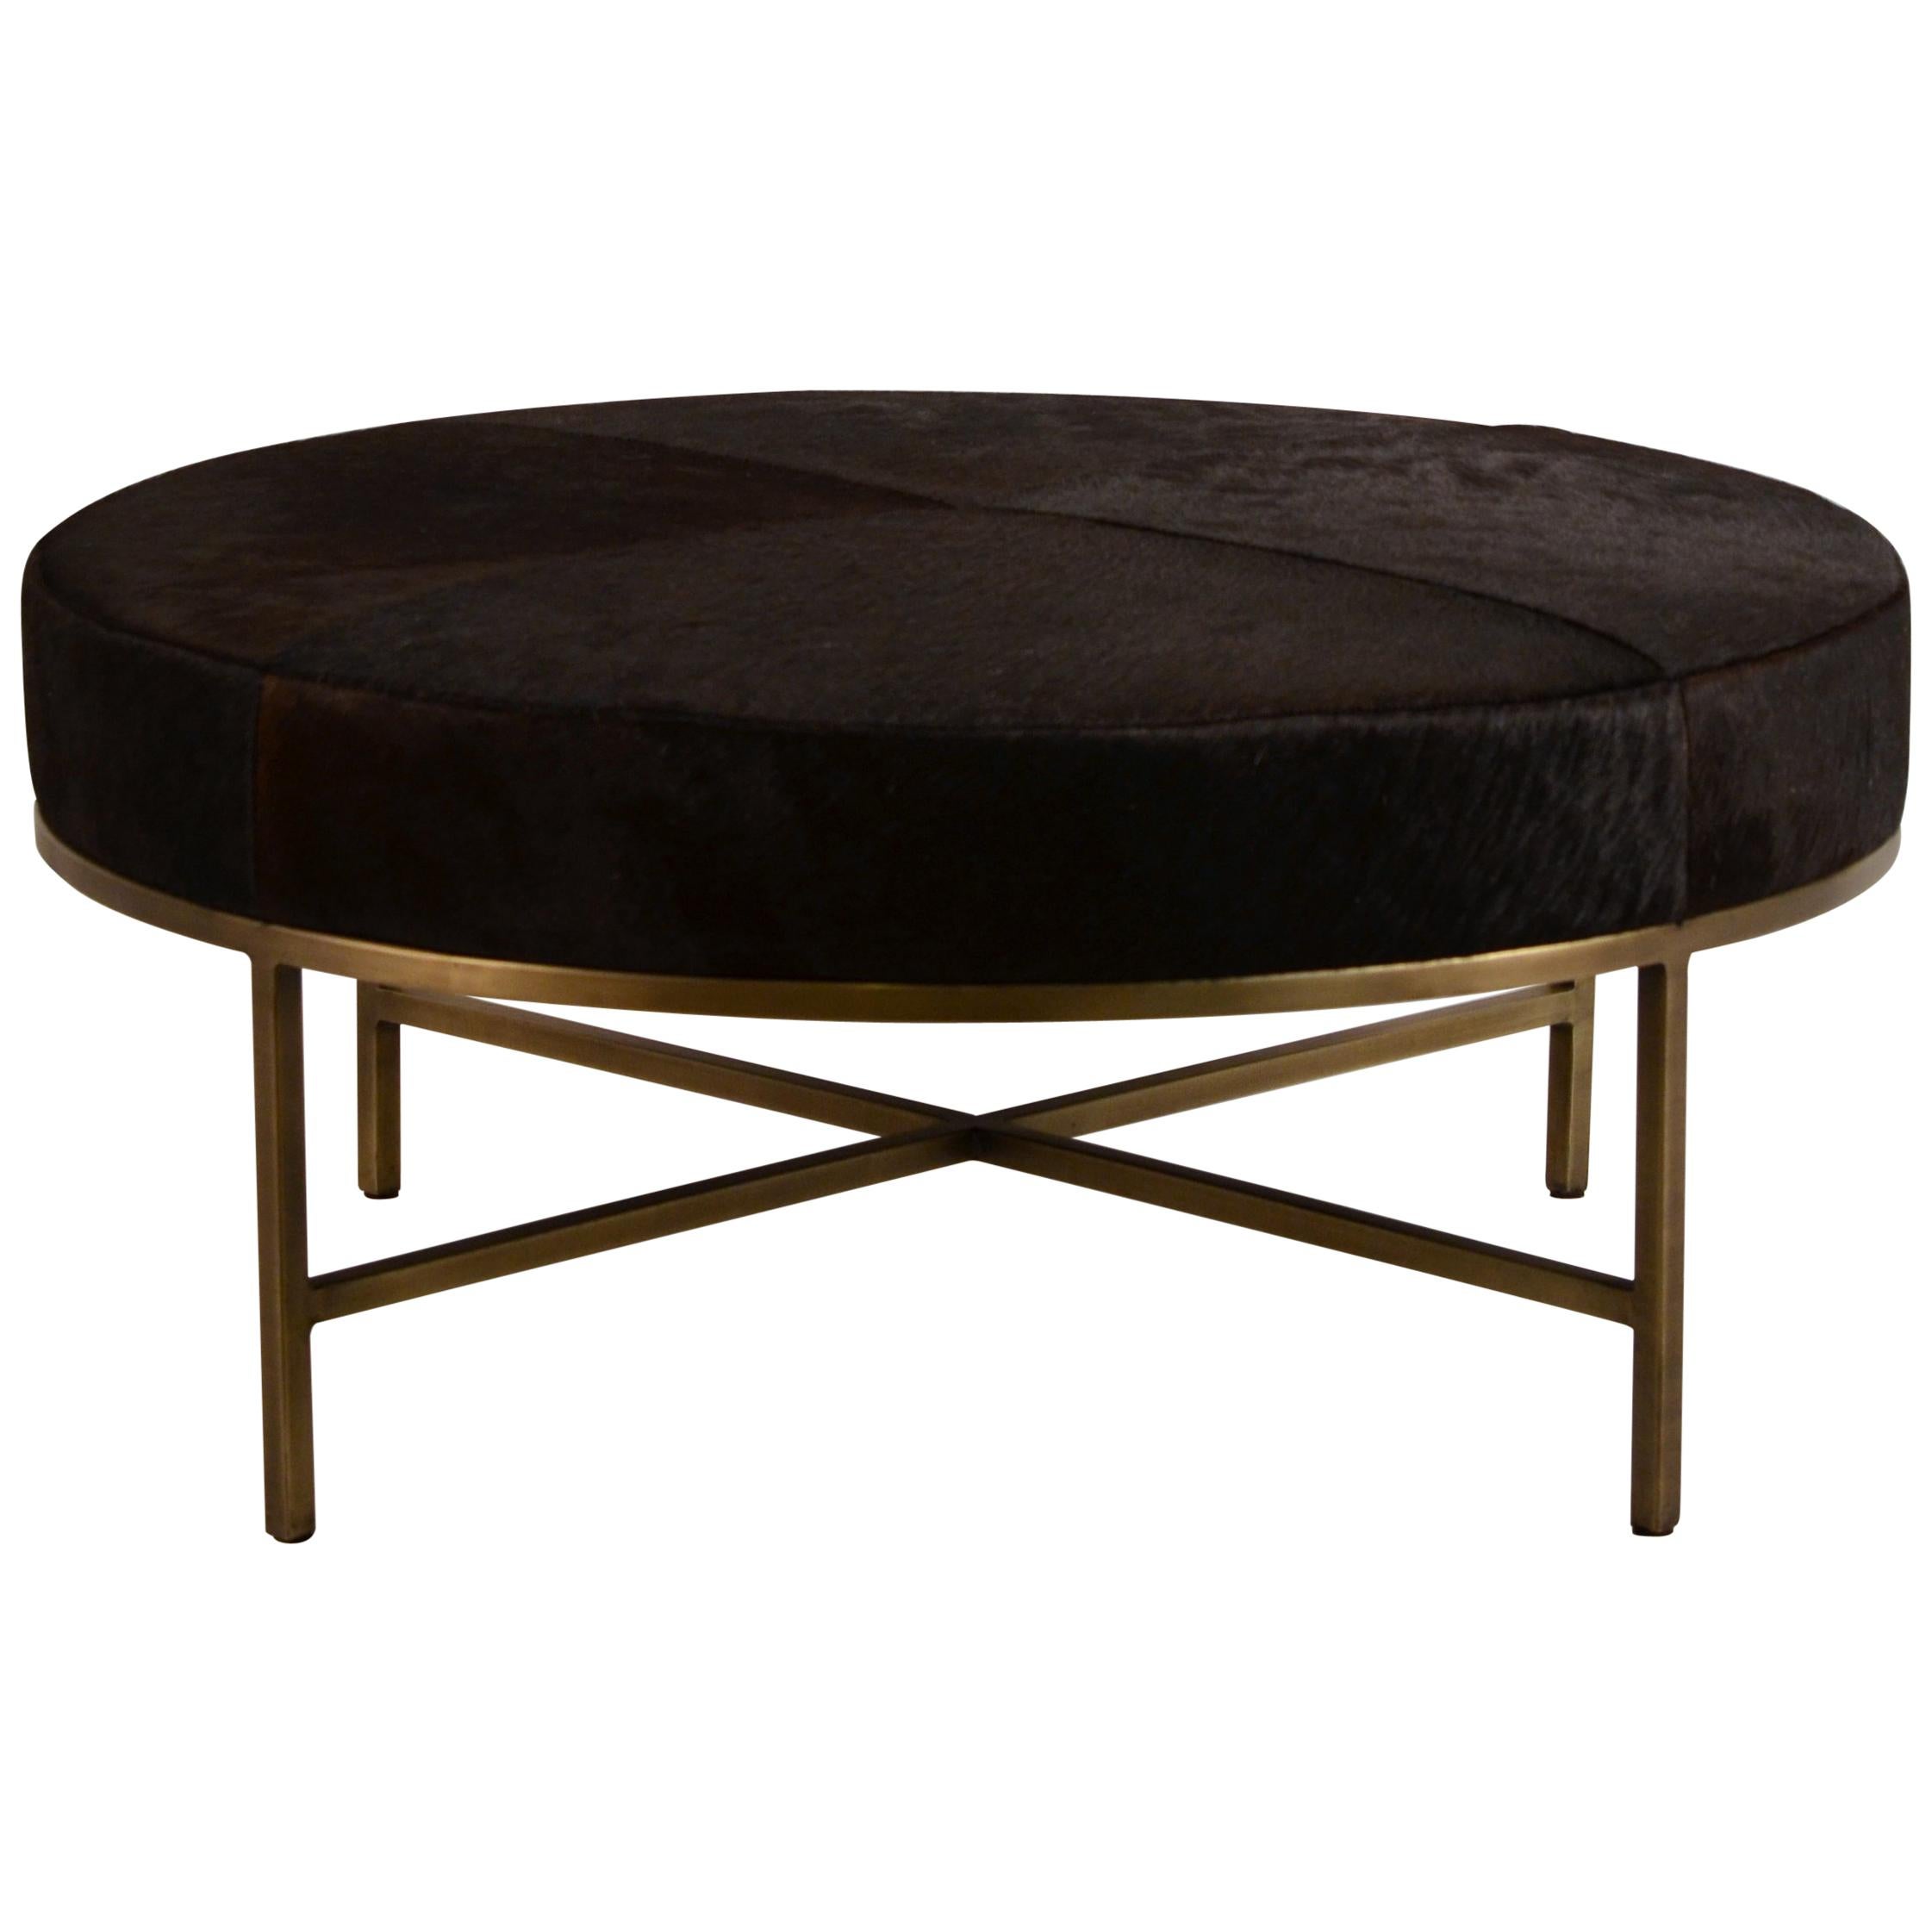 Medium 'Tambour' Ottoman by Design Frères For Sale